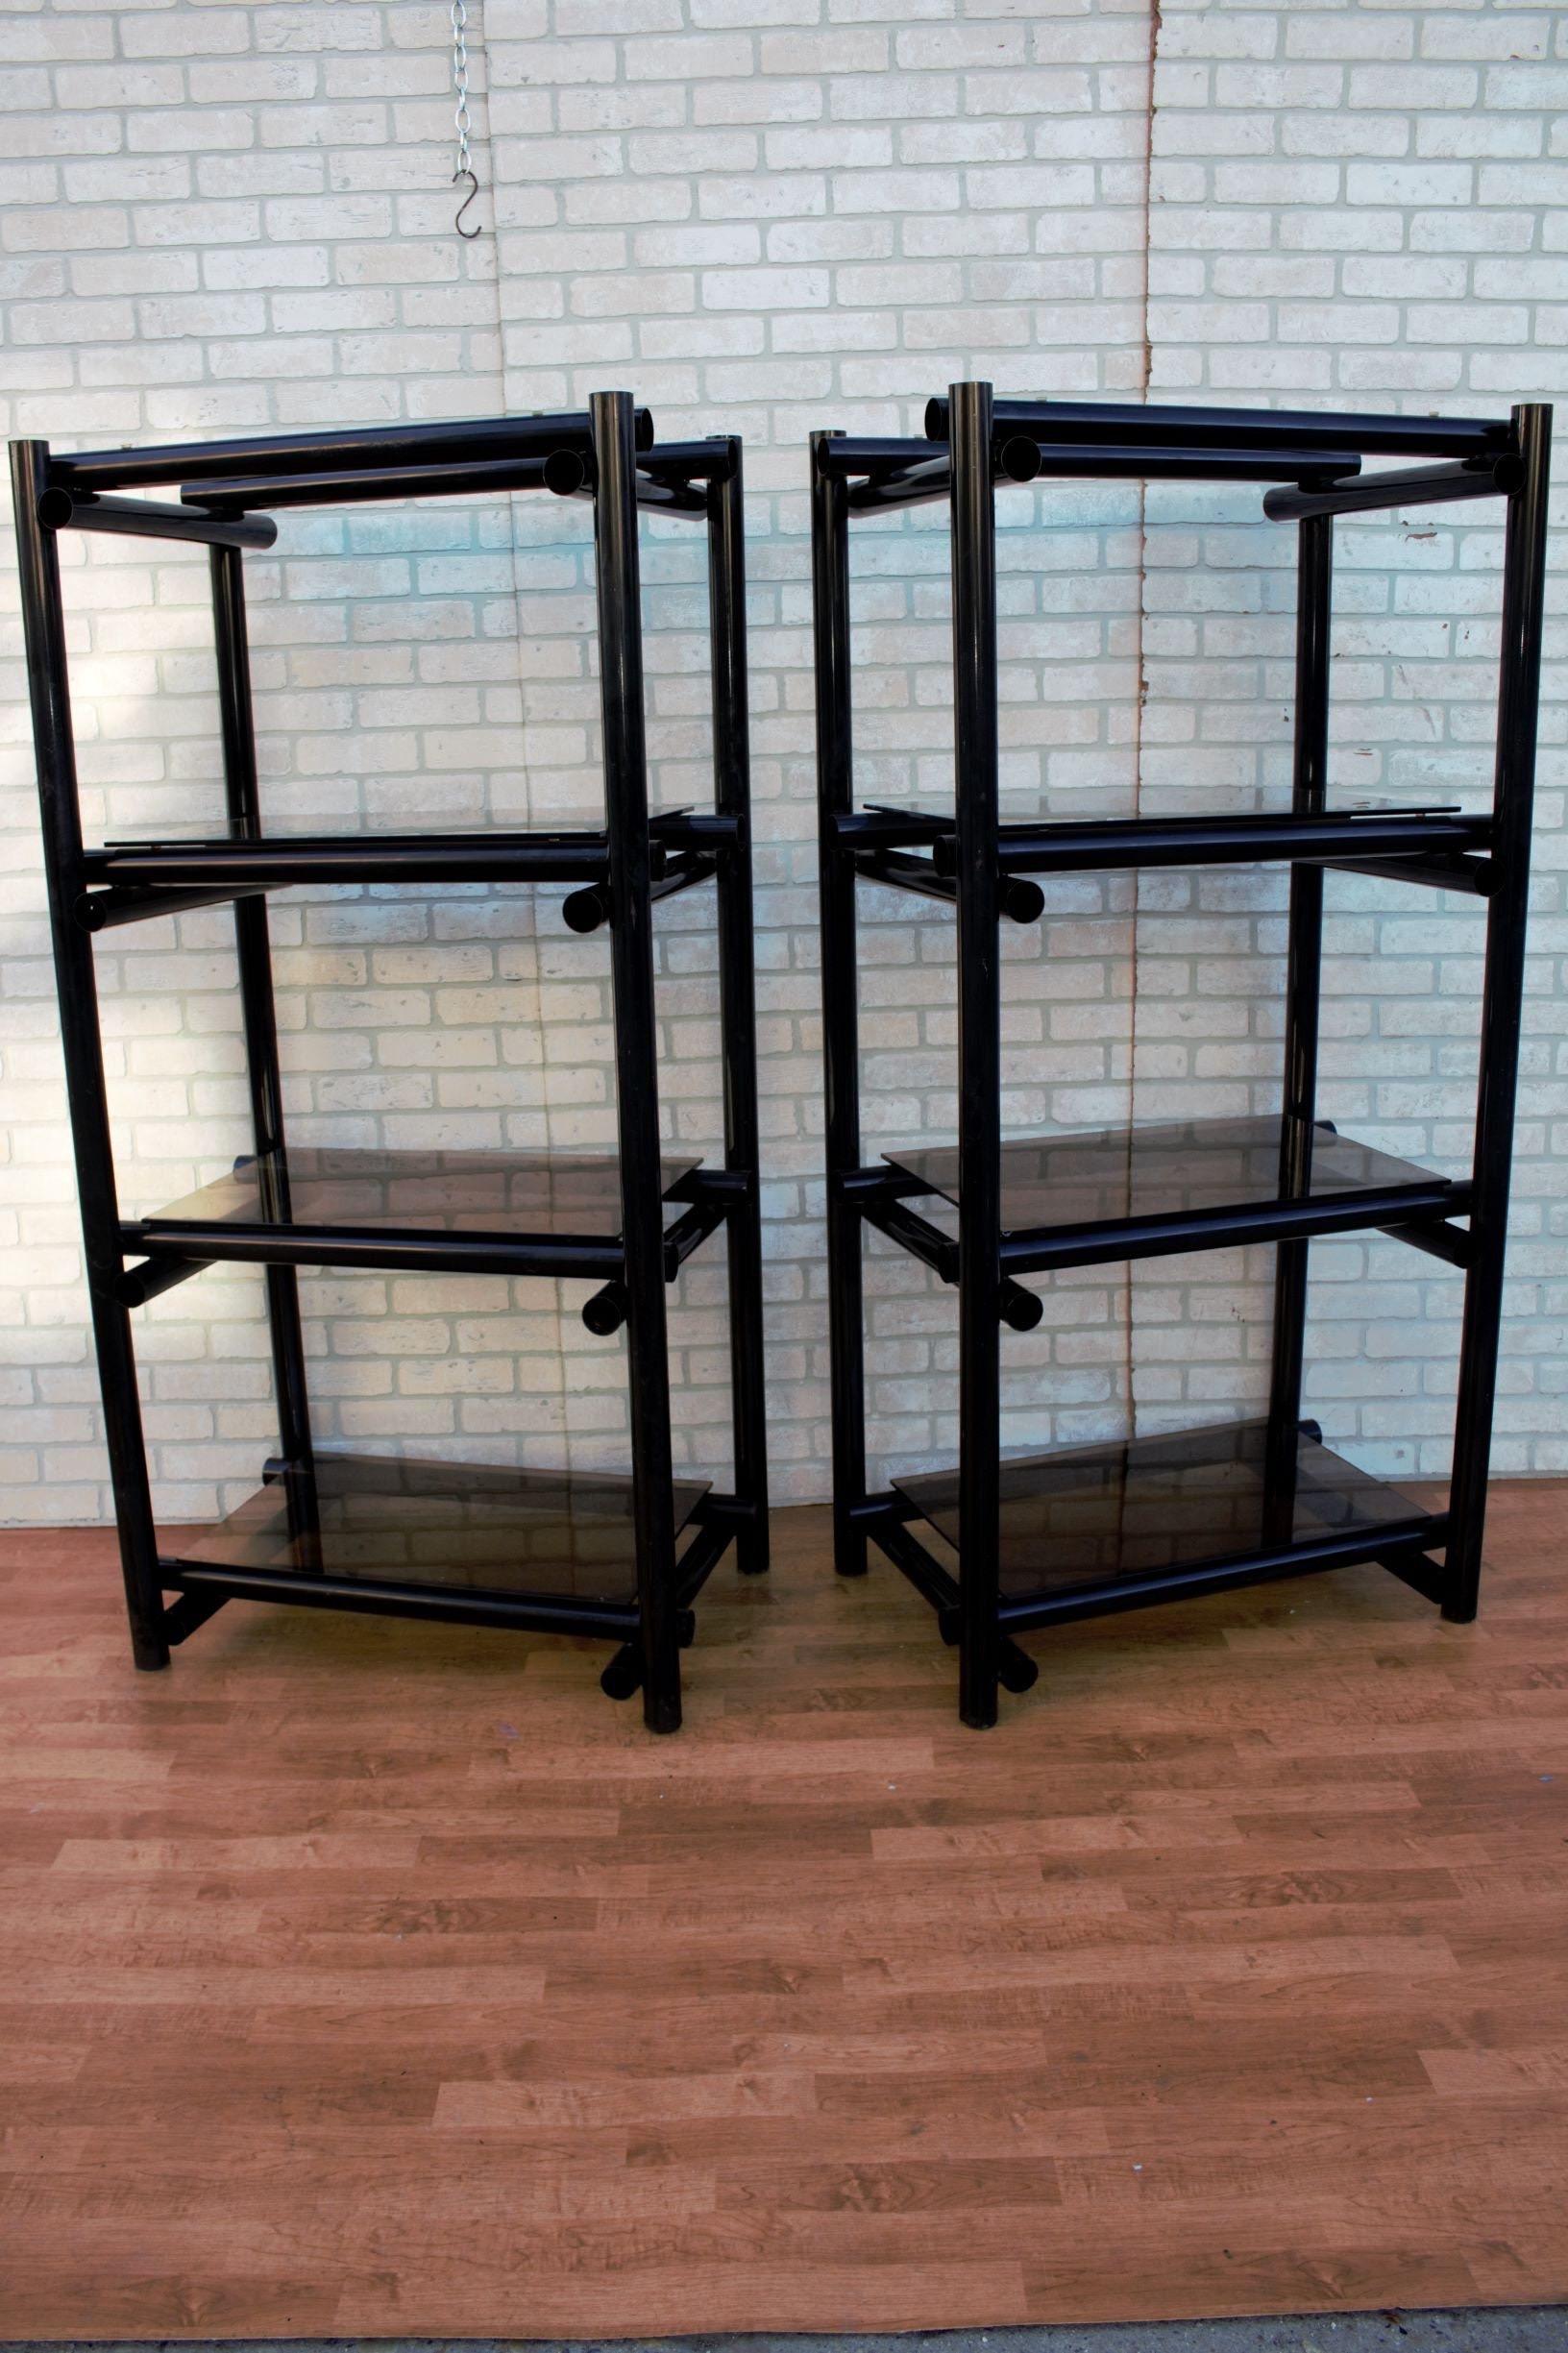 Vintage Modernist Tubular black metal shelving units/Etagere with tinted glass - pair 

Vintage Modernist Smoked Glass and Tubular Chrome Étagère 

These modern style etageres capture the Classic materials of modernism, metal and tinted glass.